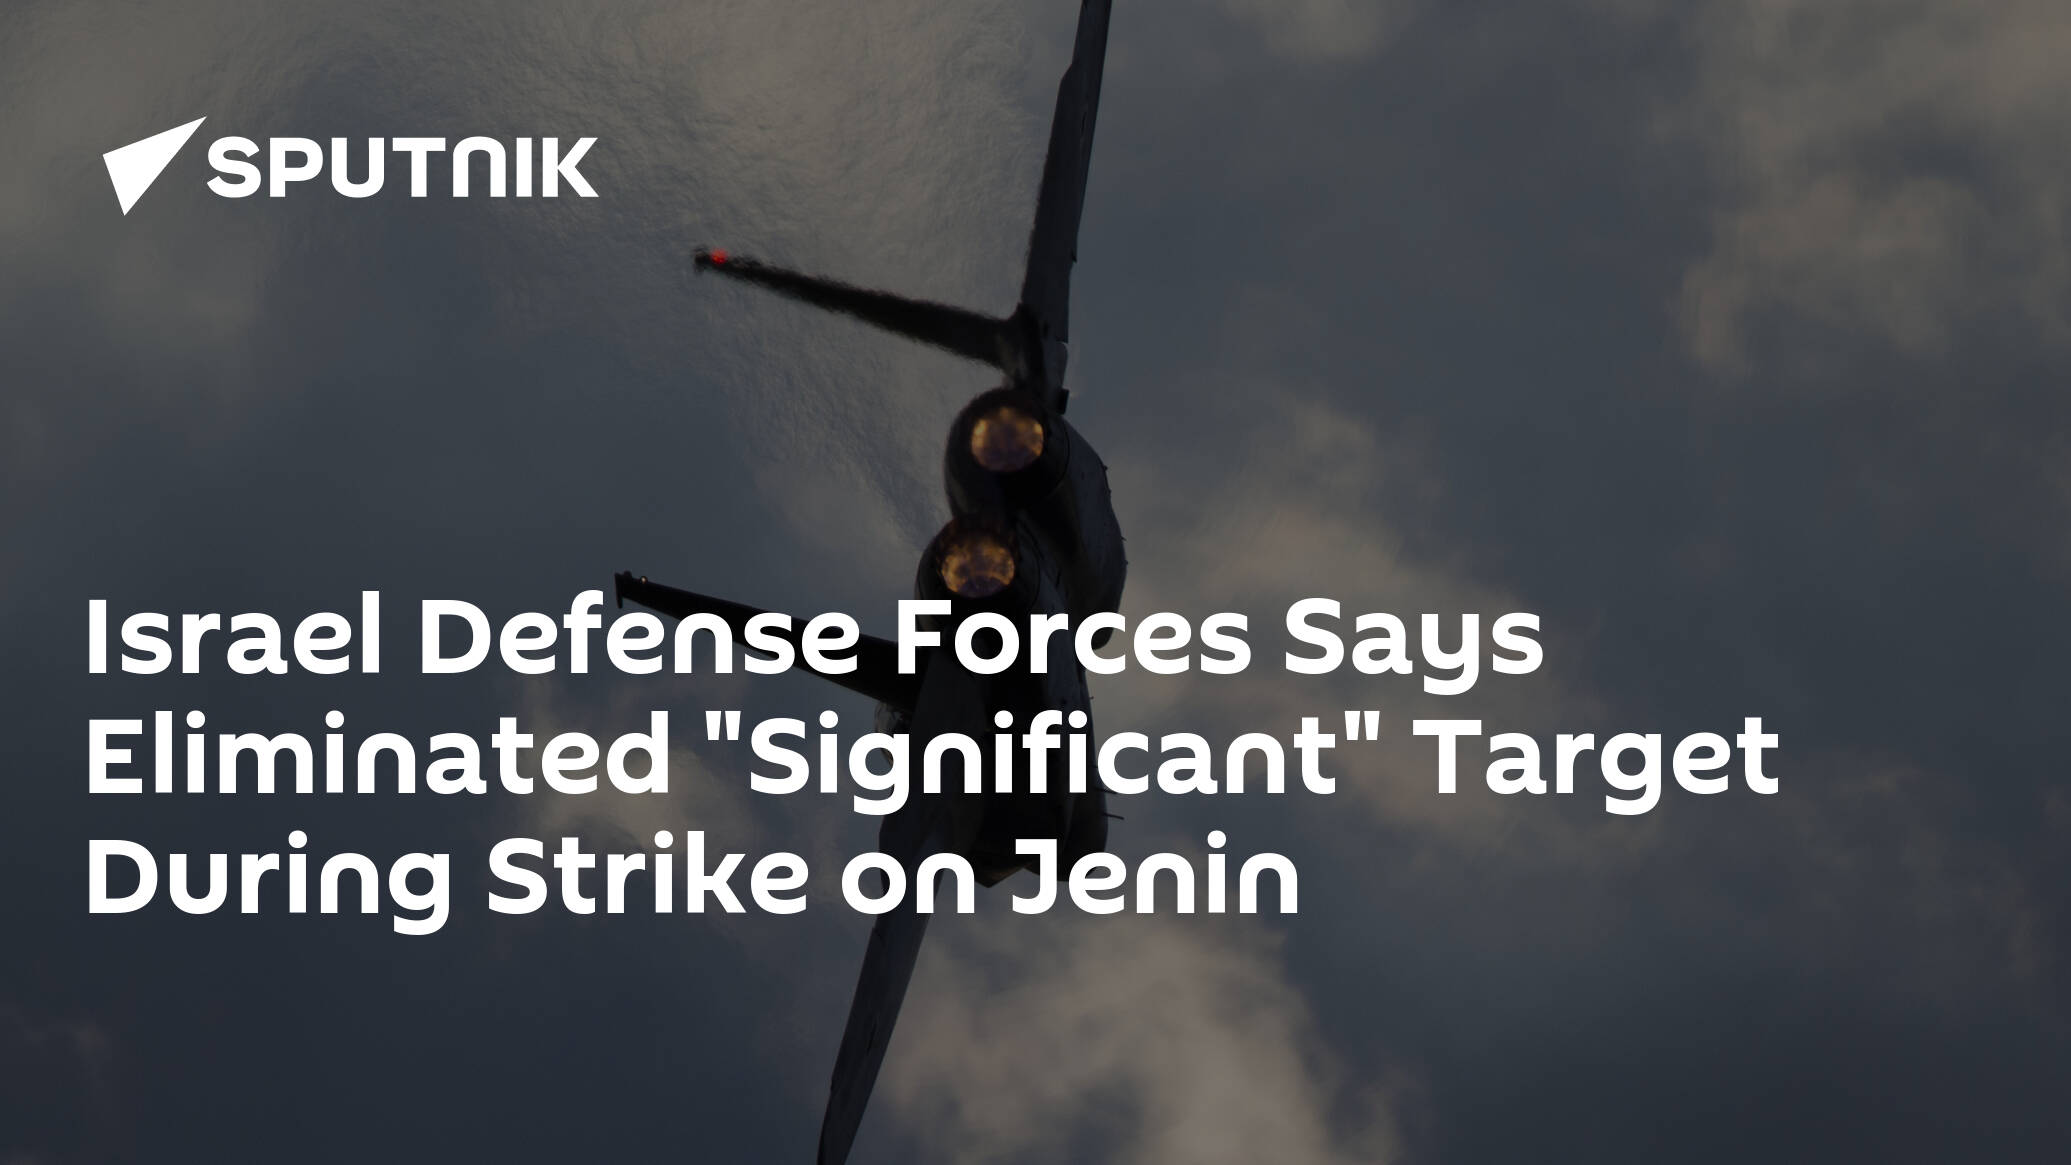 Israel Defense Forces Says Eliminated "Significant" Target During Strike on Jenin